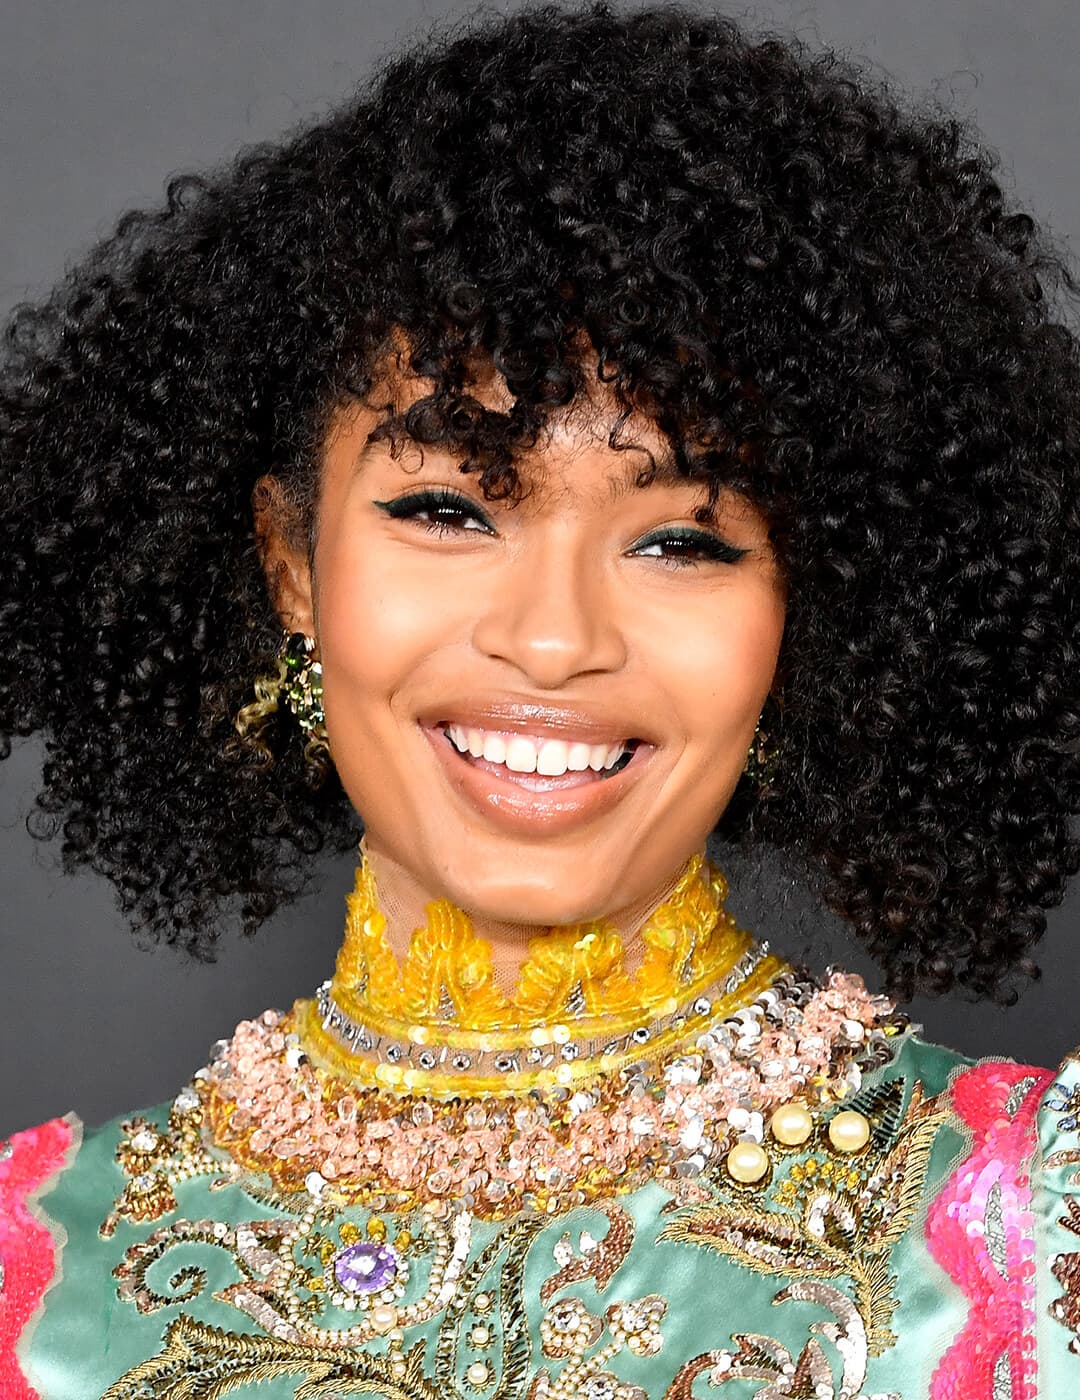 A photo of Yara Shahidi wearing a bright smile in her natural black curly hair with a curl specific haircut dressed in green full of pearls and beads 